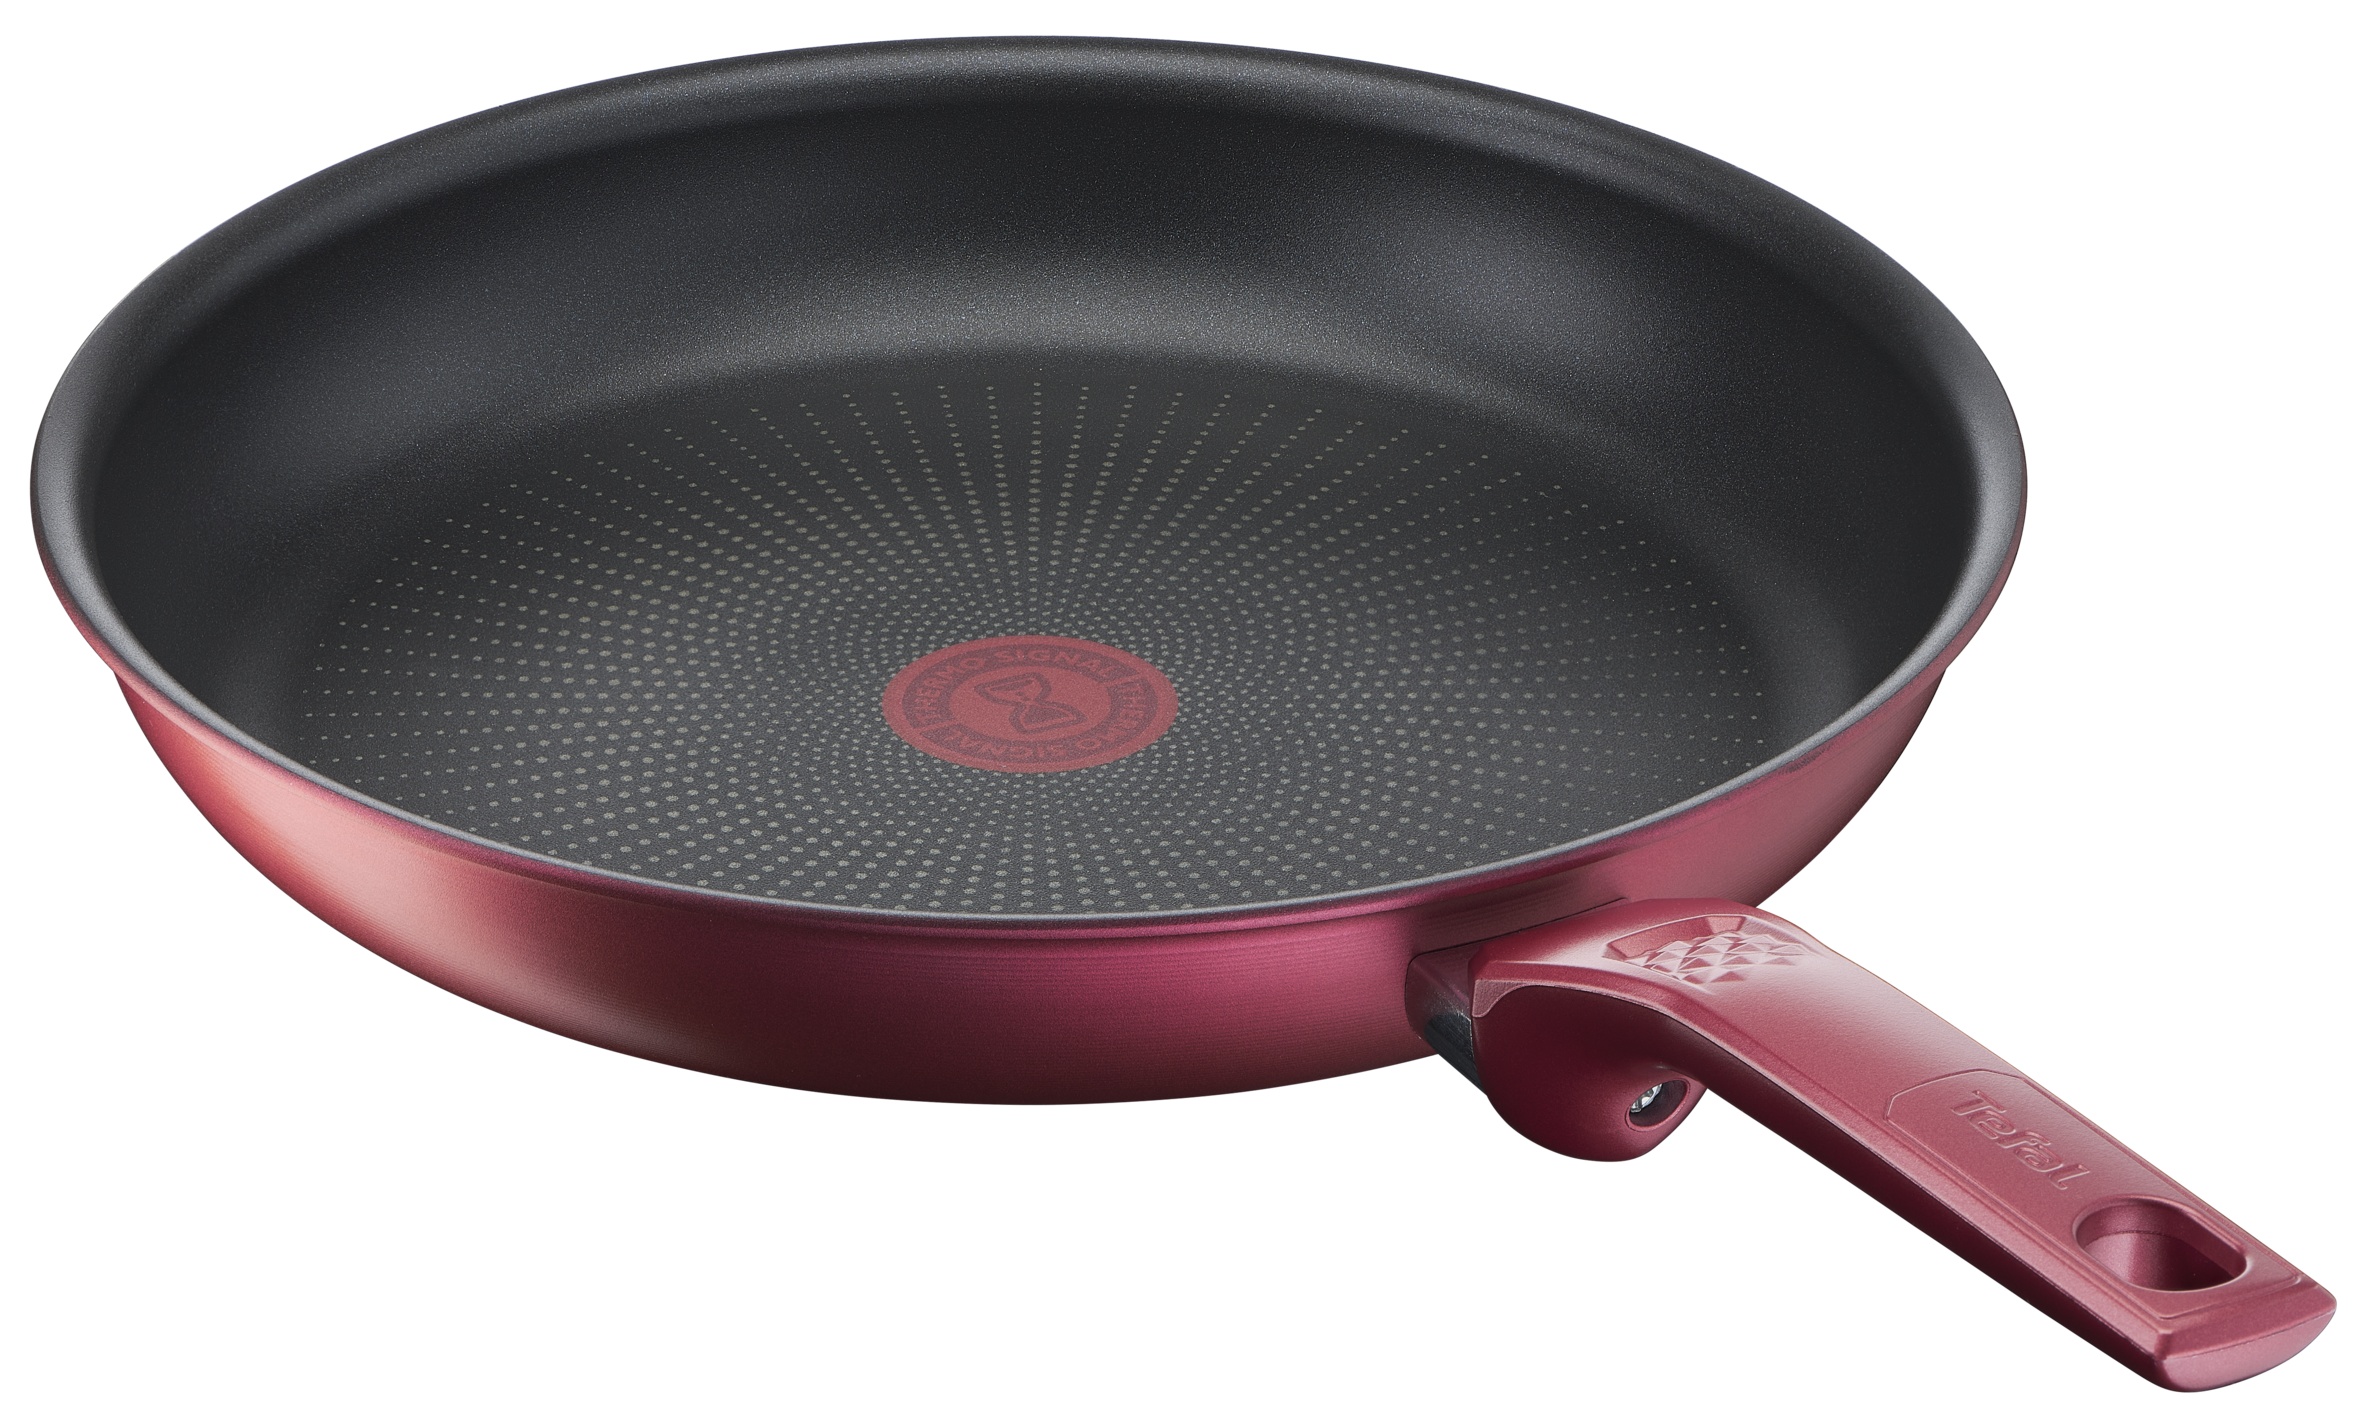 Tefal Daily Chef Red Non-Stick Induction Frypan 30cm